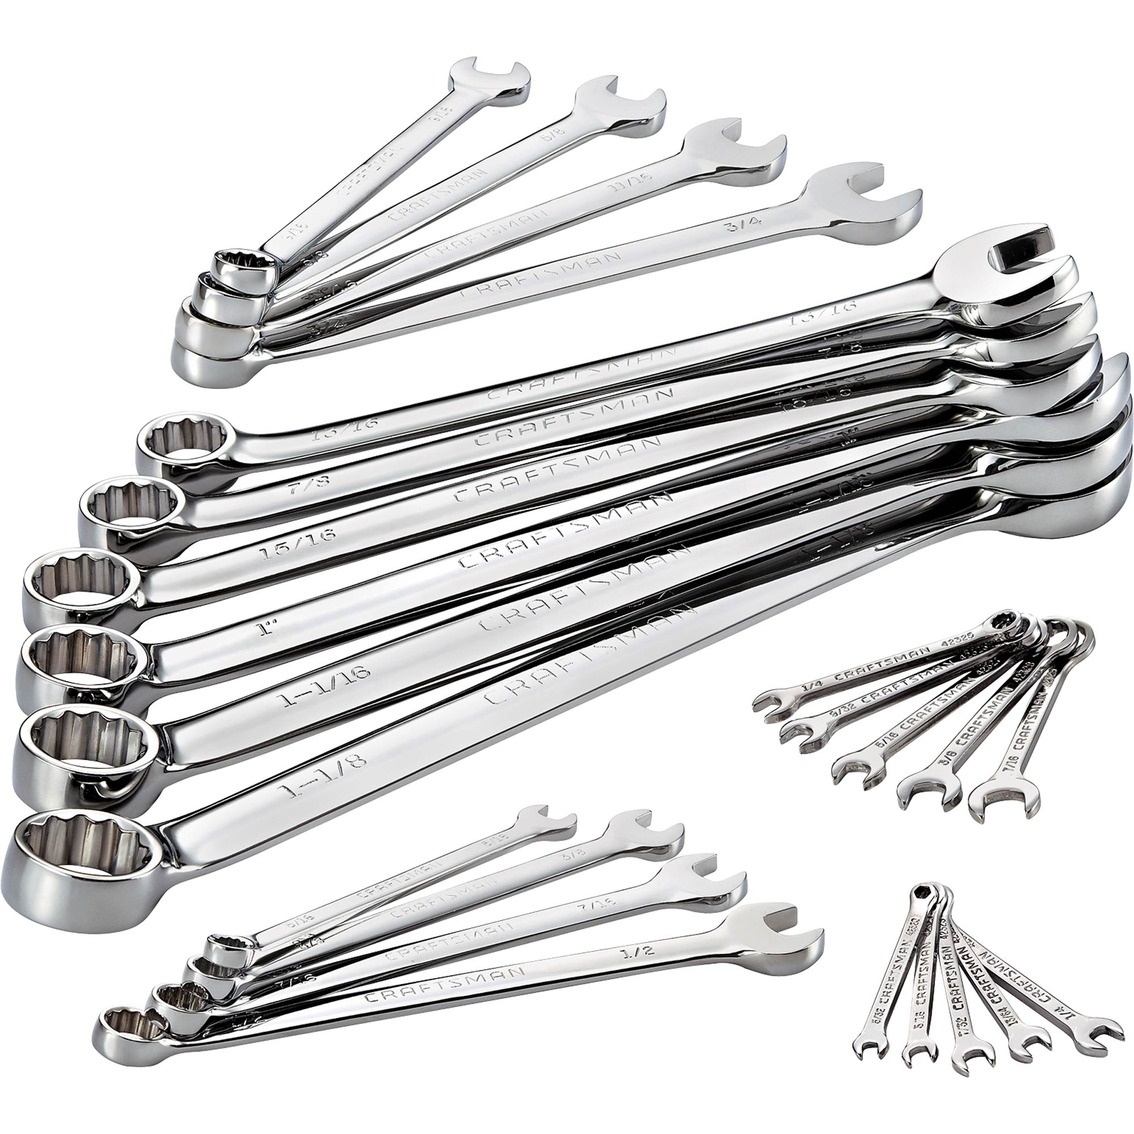 Craftsman 24 Pc. Full Polish Sae Combination Wrench Set | Wrenches